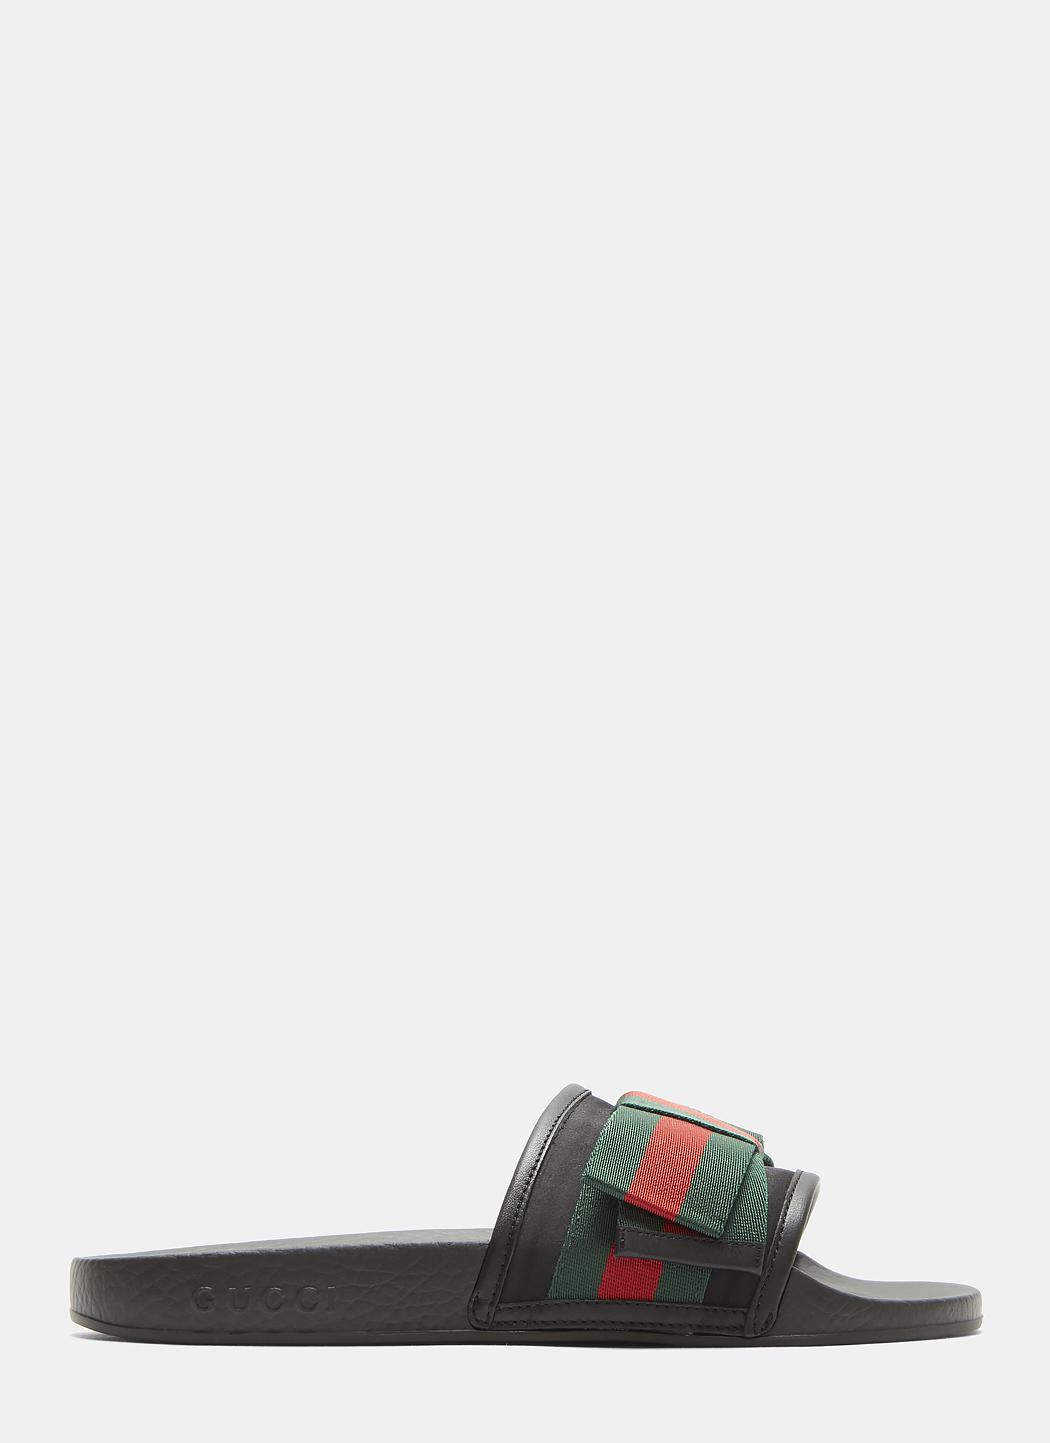 gucci slides women with bow